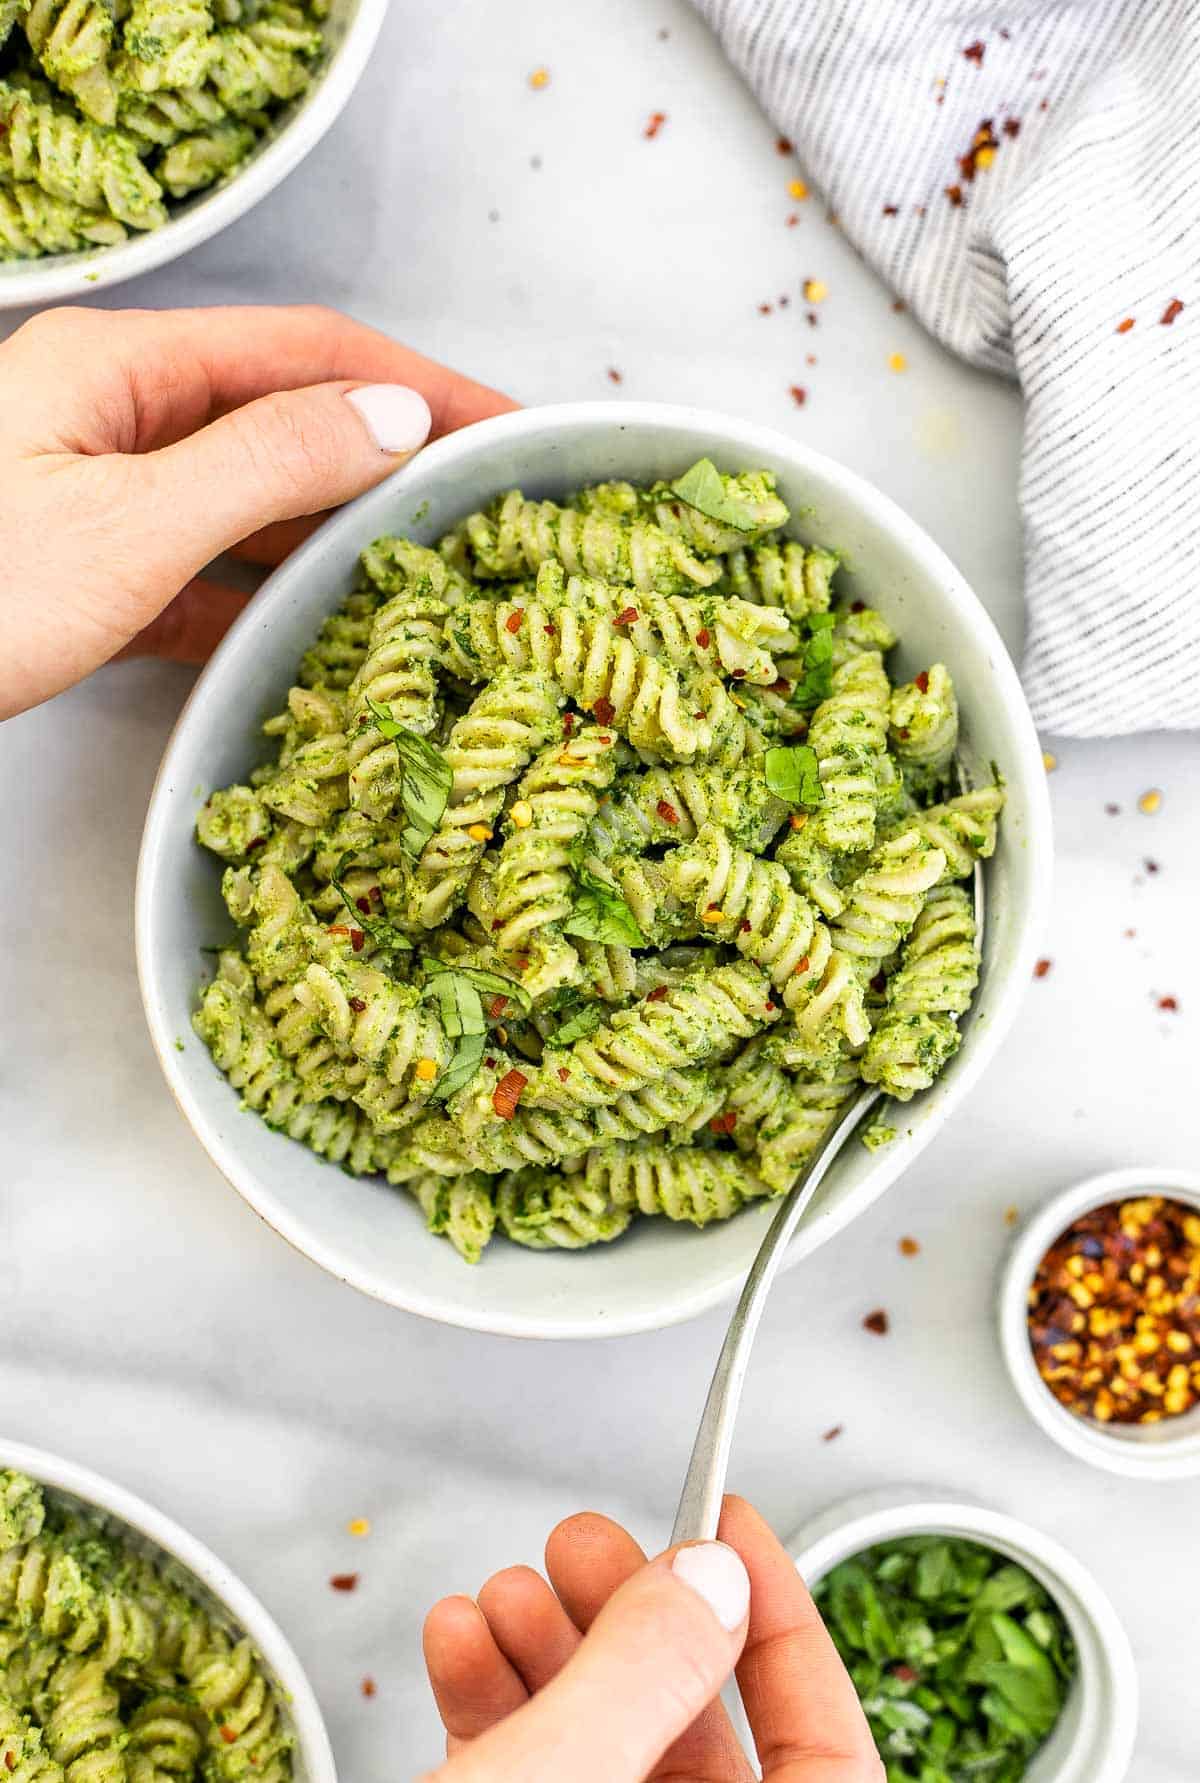 Hands holding the bowl with the nut free pesto pasta